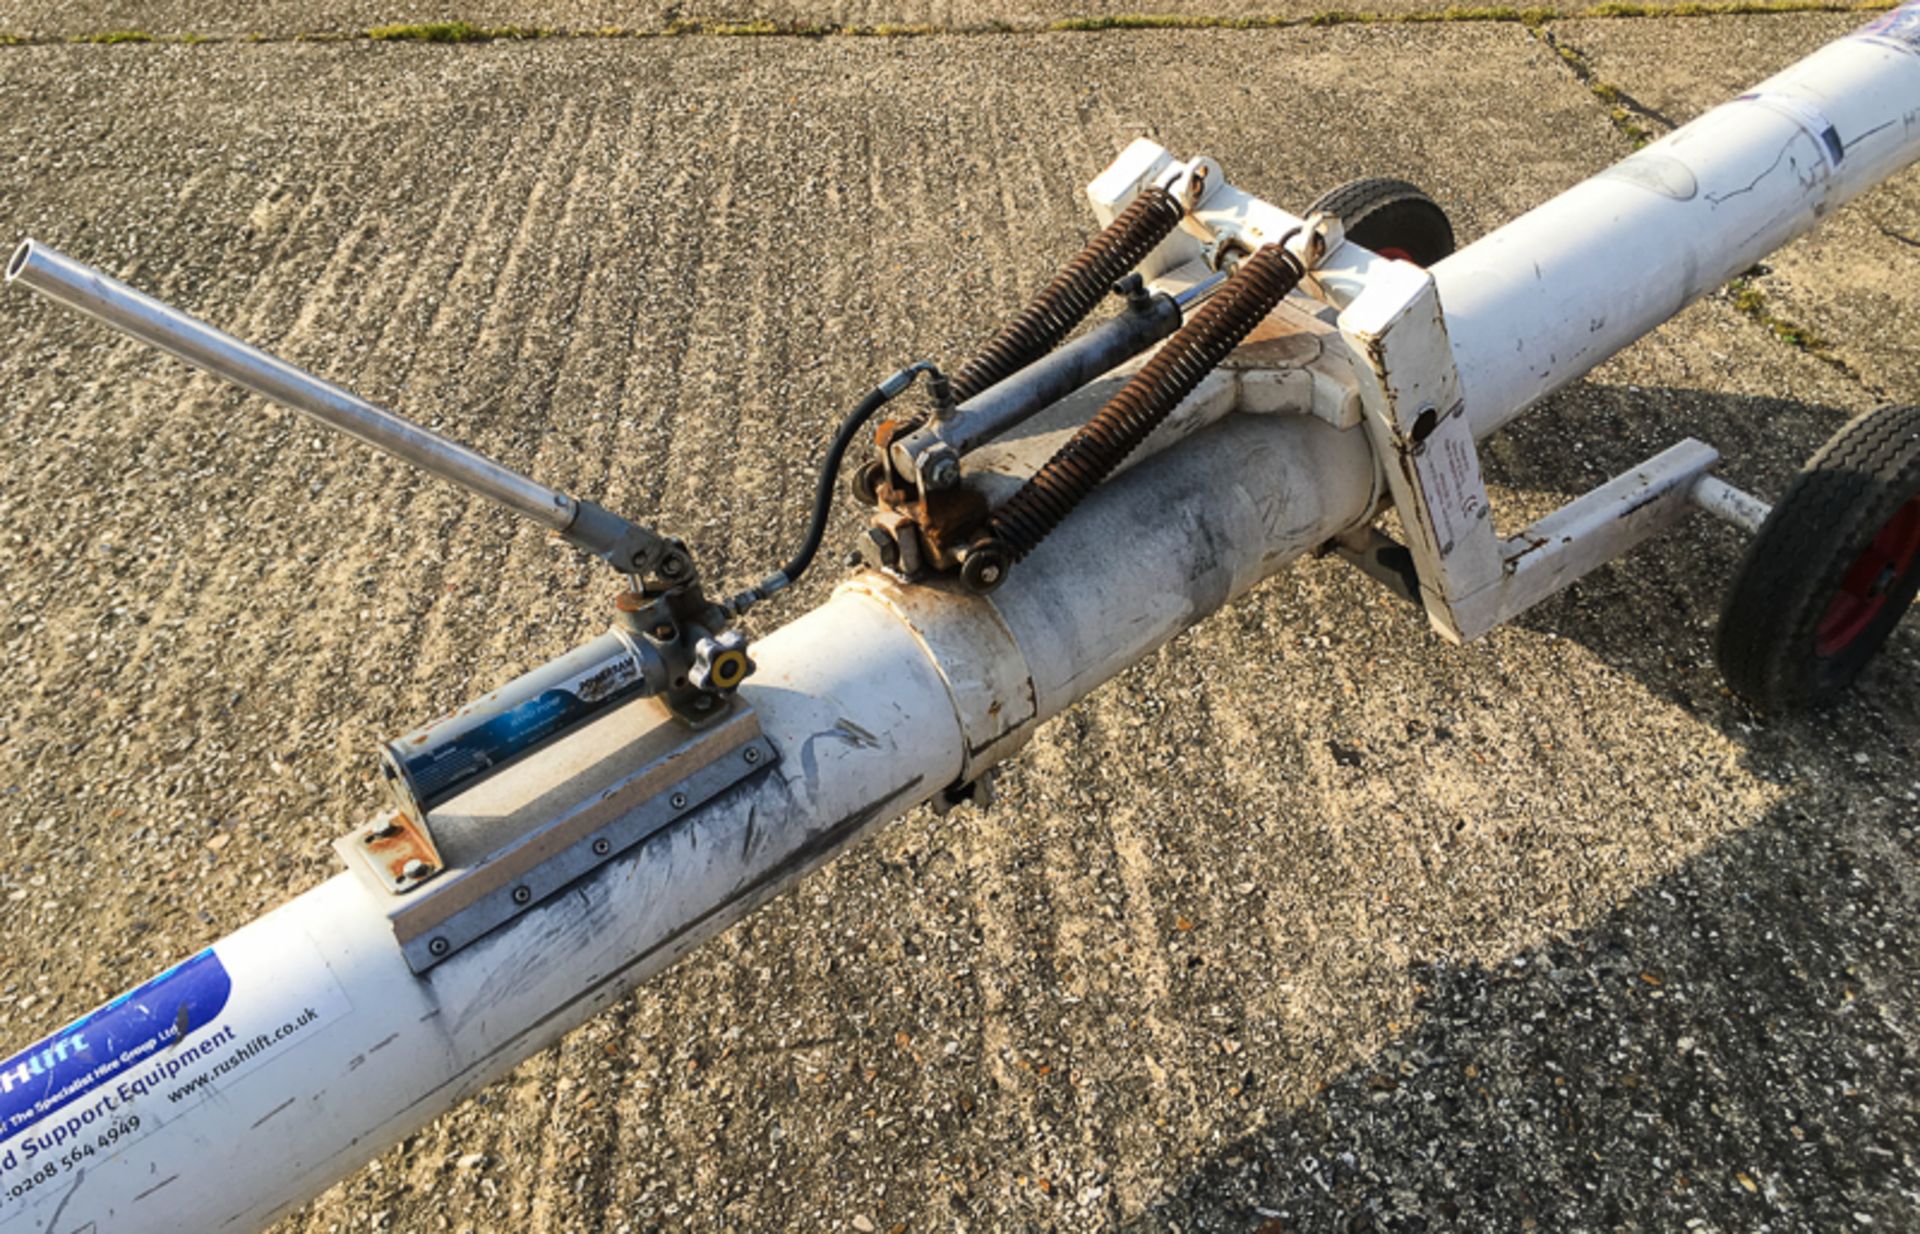 Airside GSE Ltd Boeing 757 Tow Bar - Image 3 of 7